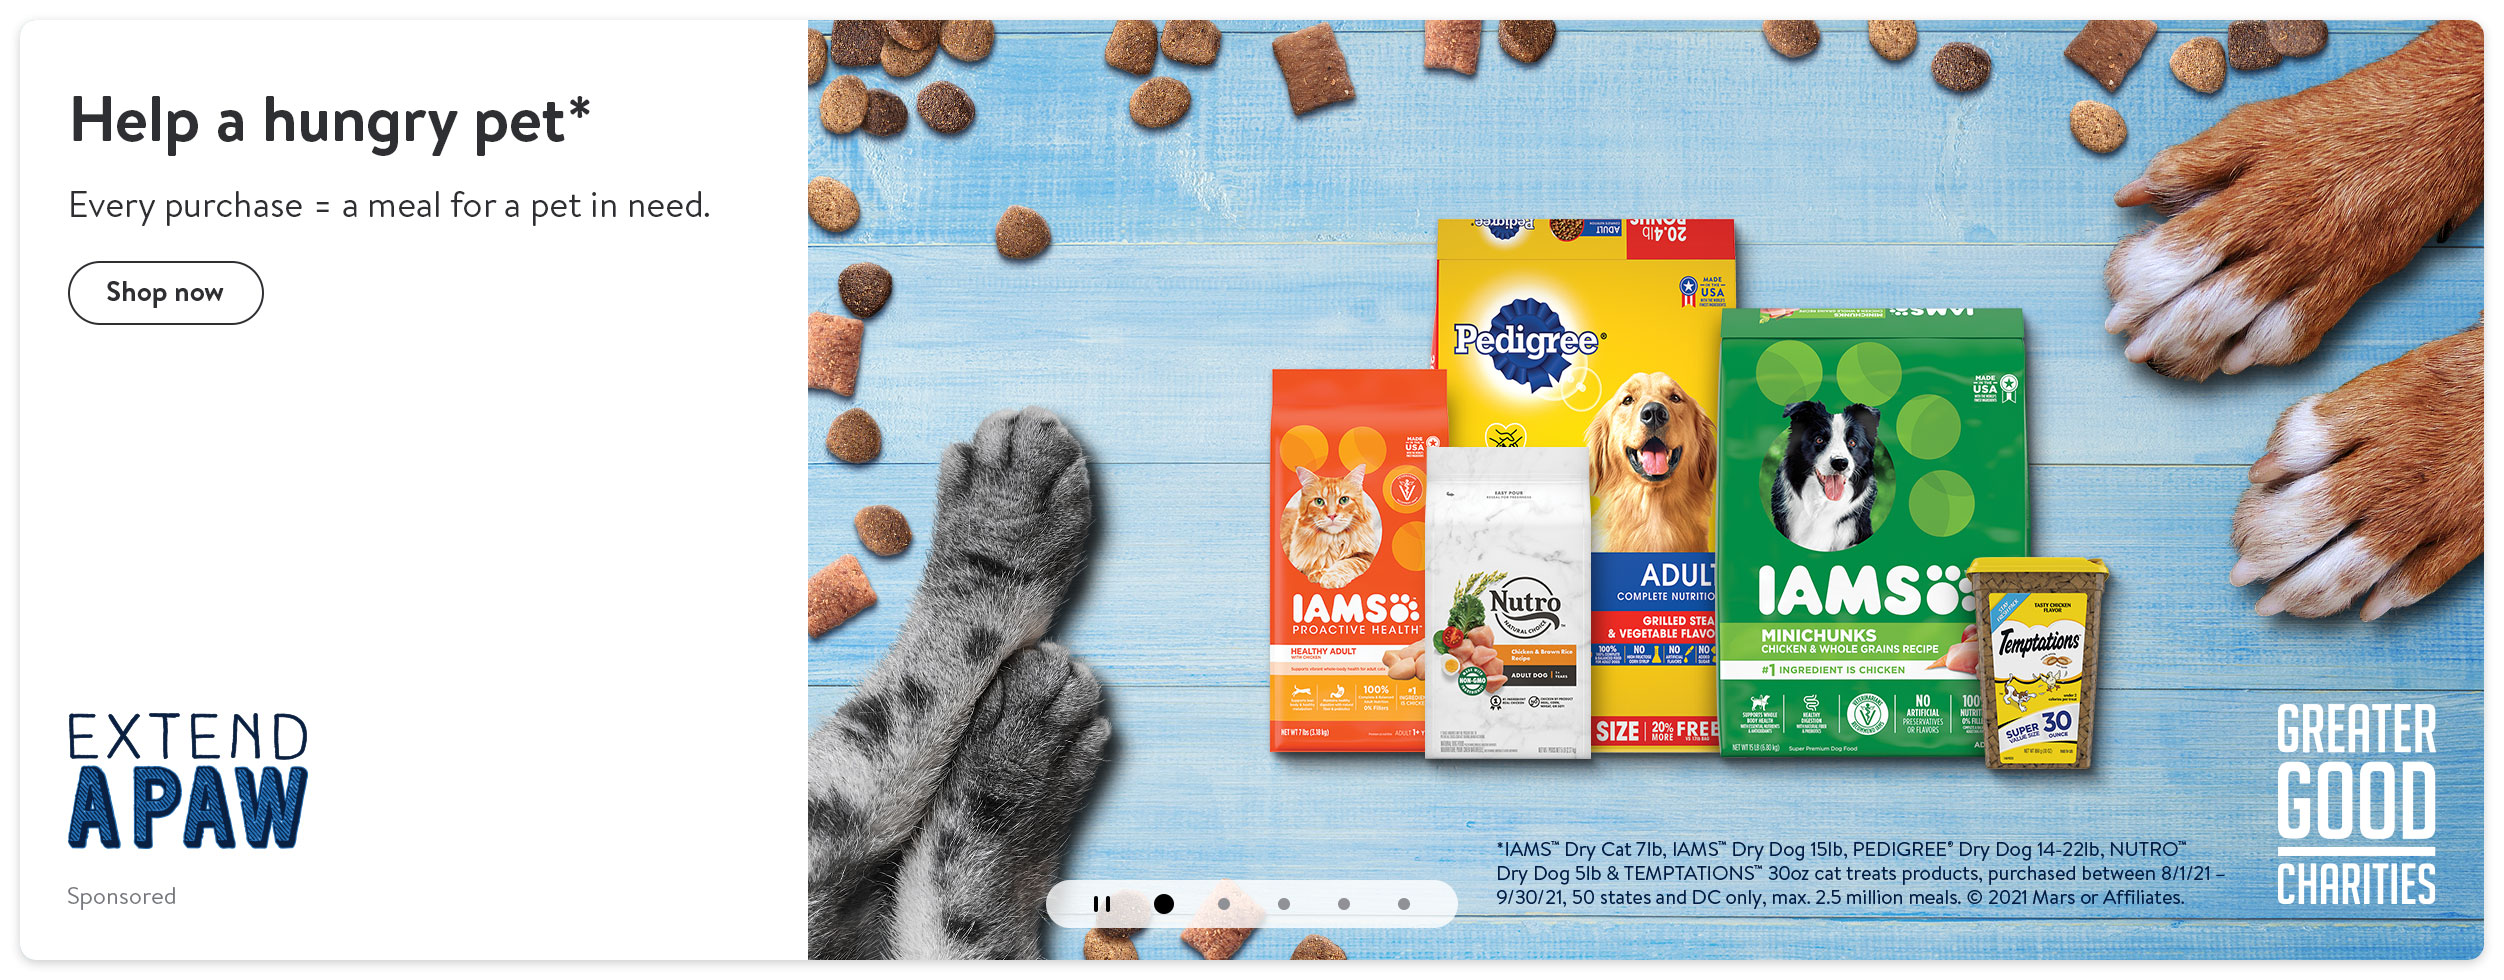 Greater Good Charities, in partnership with Mars Petcare, has launched Extend a Paw to donate 2.5 million pet meals to help end hunger in animal shelters and rescues across the country.